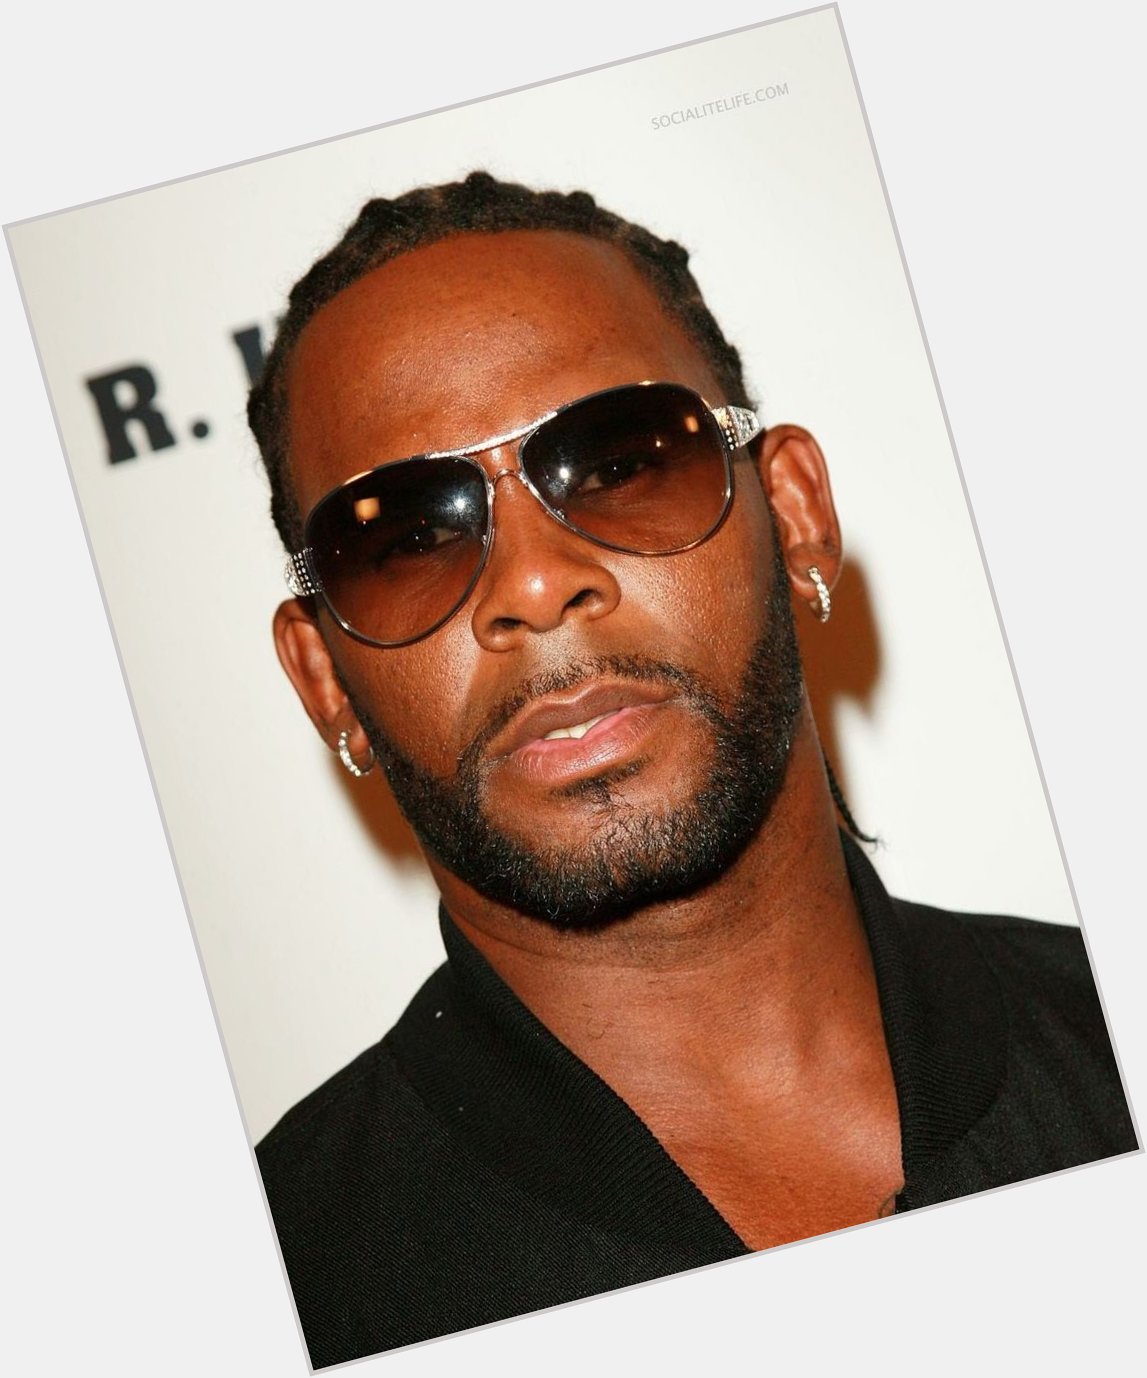 Wishing a Happy 54th Birthday to R&B singer R Kelly!Love your music and singing voice!        